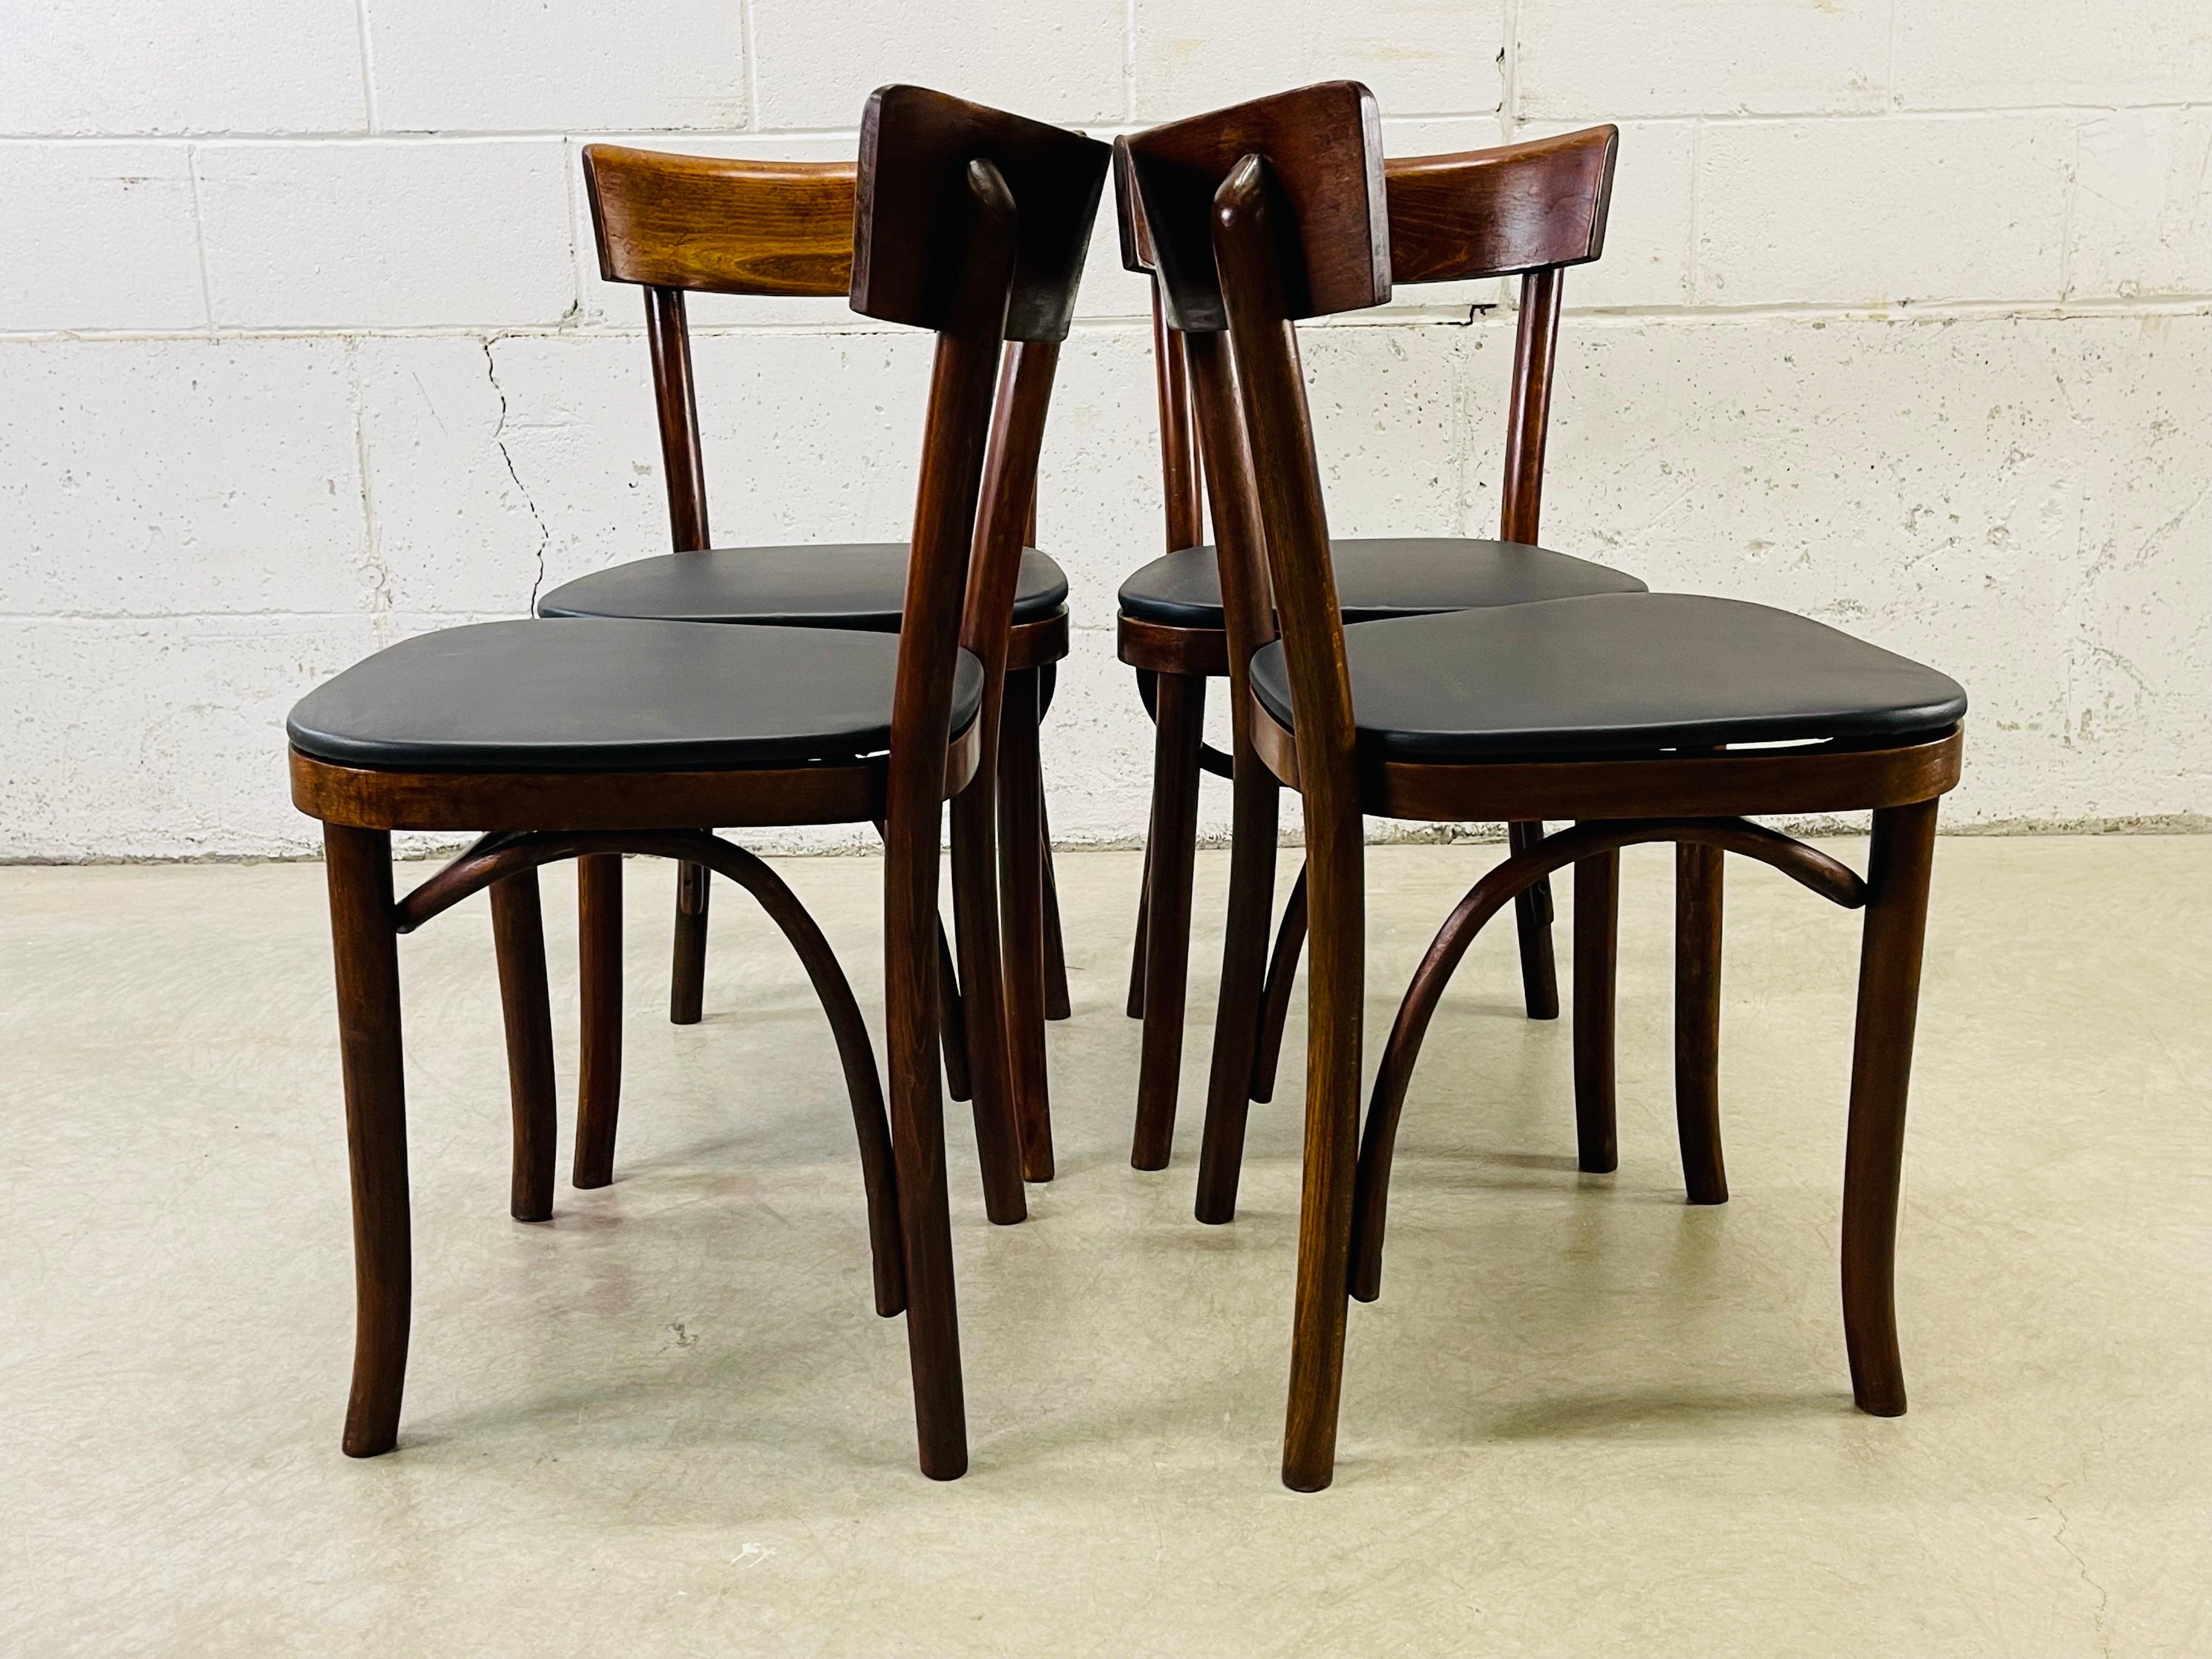 1950s Thonet Style Dining Chairs, Set of 4 For Sale 2